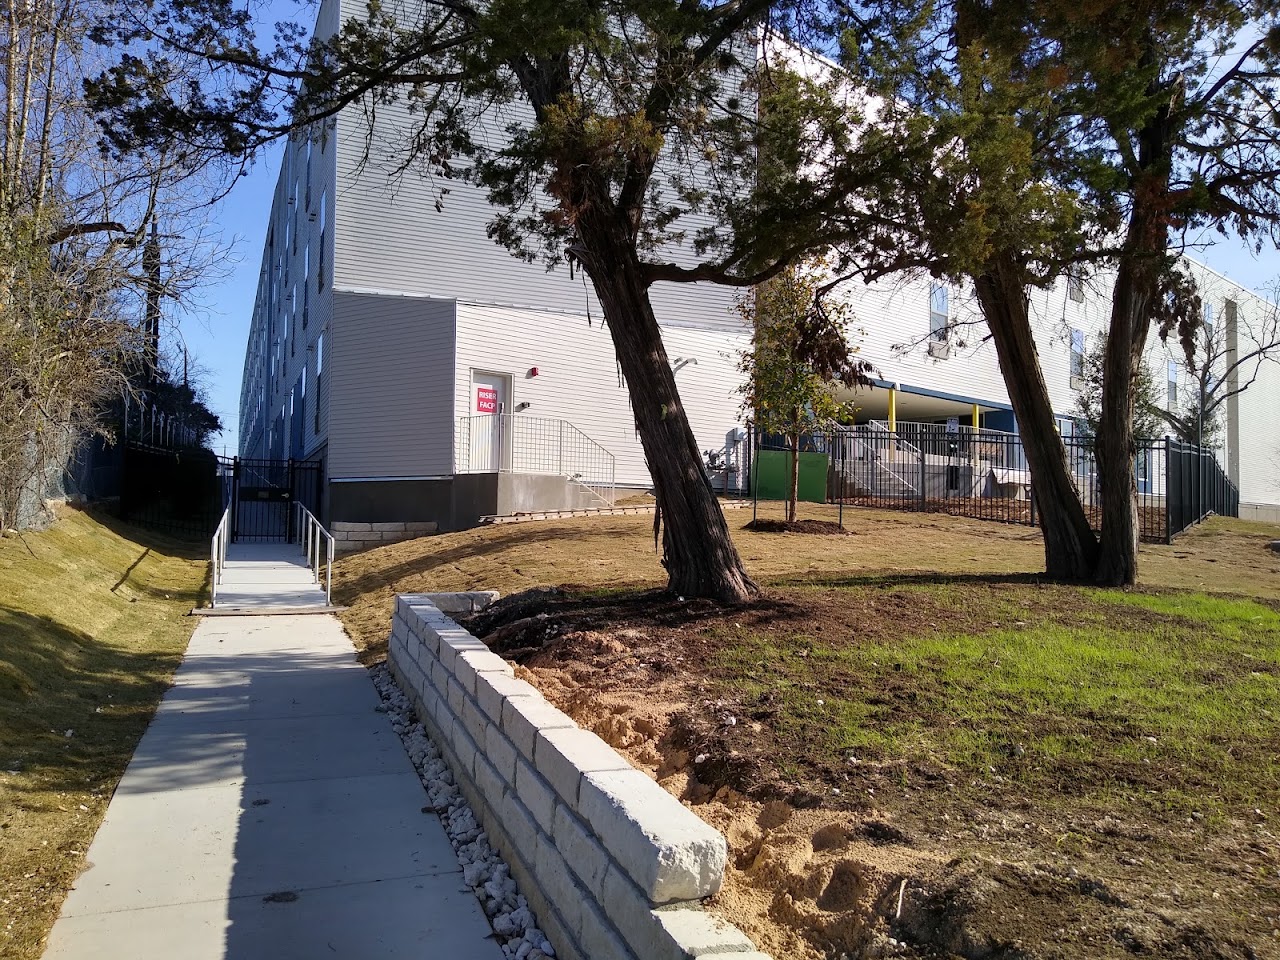 Photo of WATERLOO TERRACE. Affordable housing located at 12190 N MOPAC EXPY AUSTIN, TX 78758